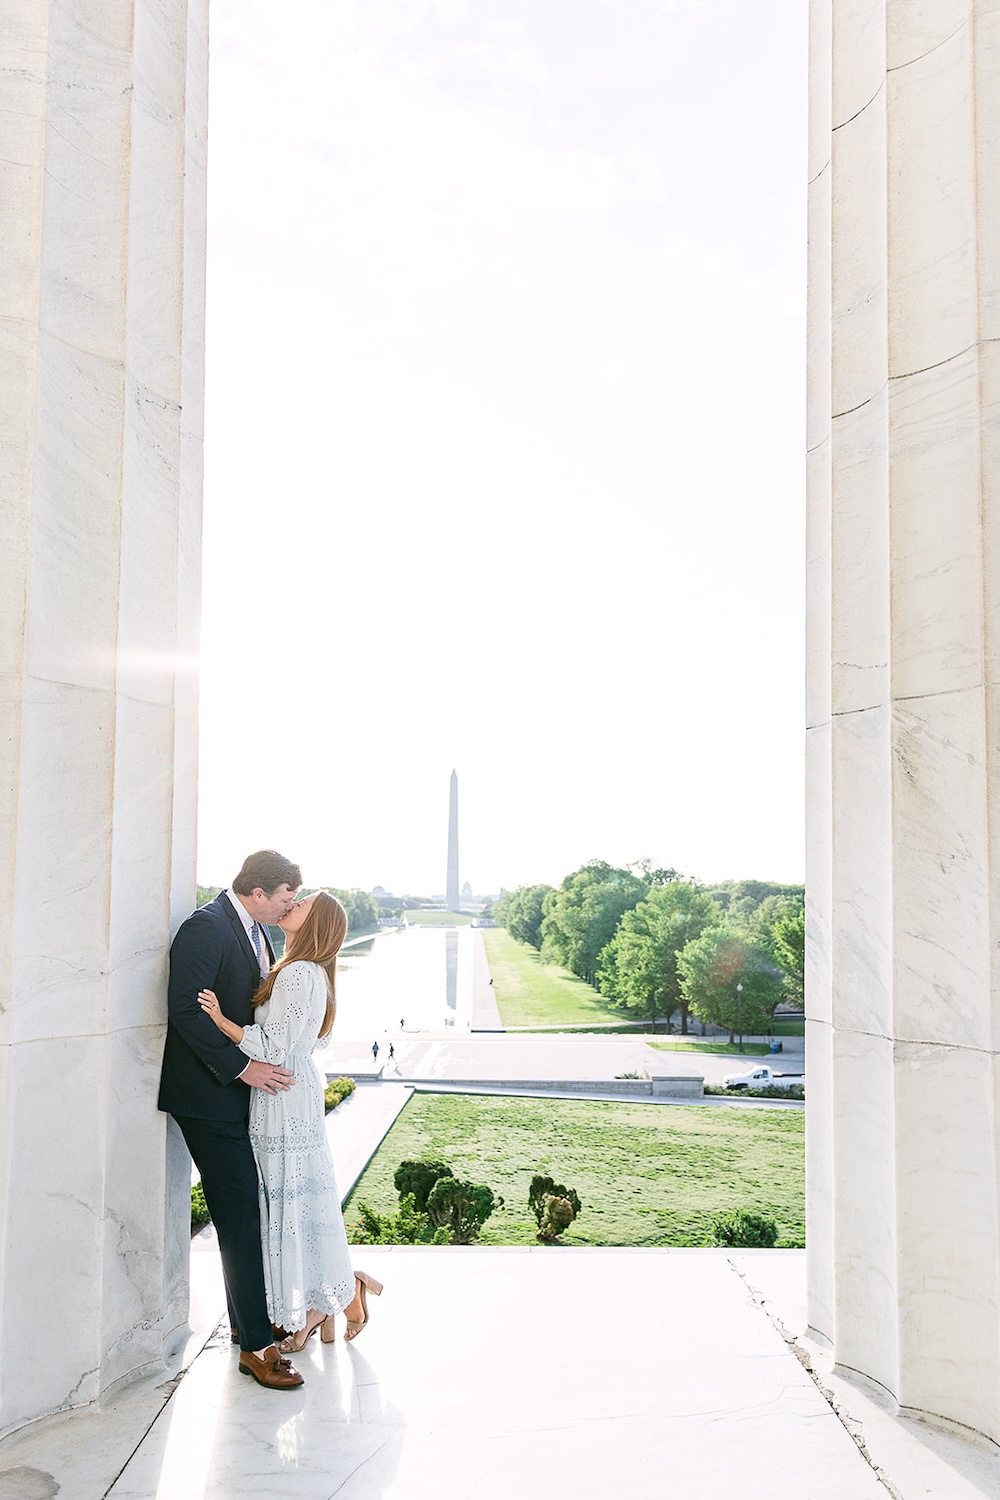 Couple kisses at the Lincoln Memorial with Washington Monument in the background at sunset. Spring wedding engagement photo session. Sarah Bradshaw Photography.